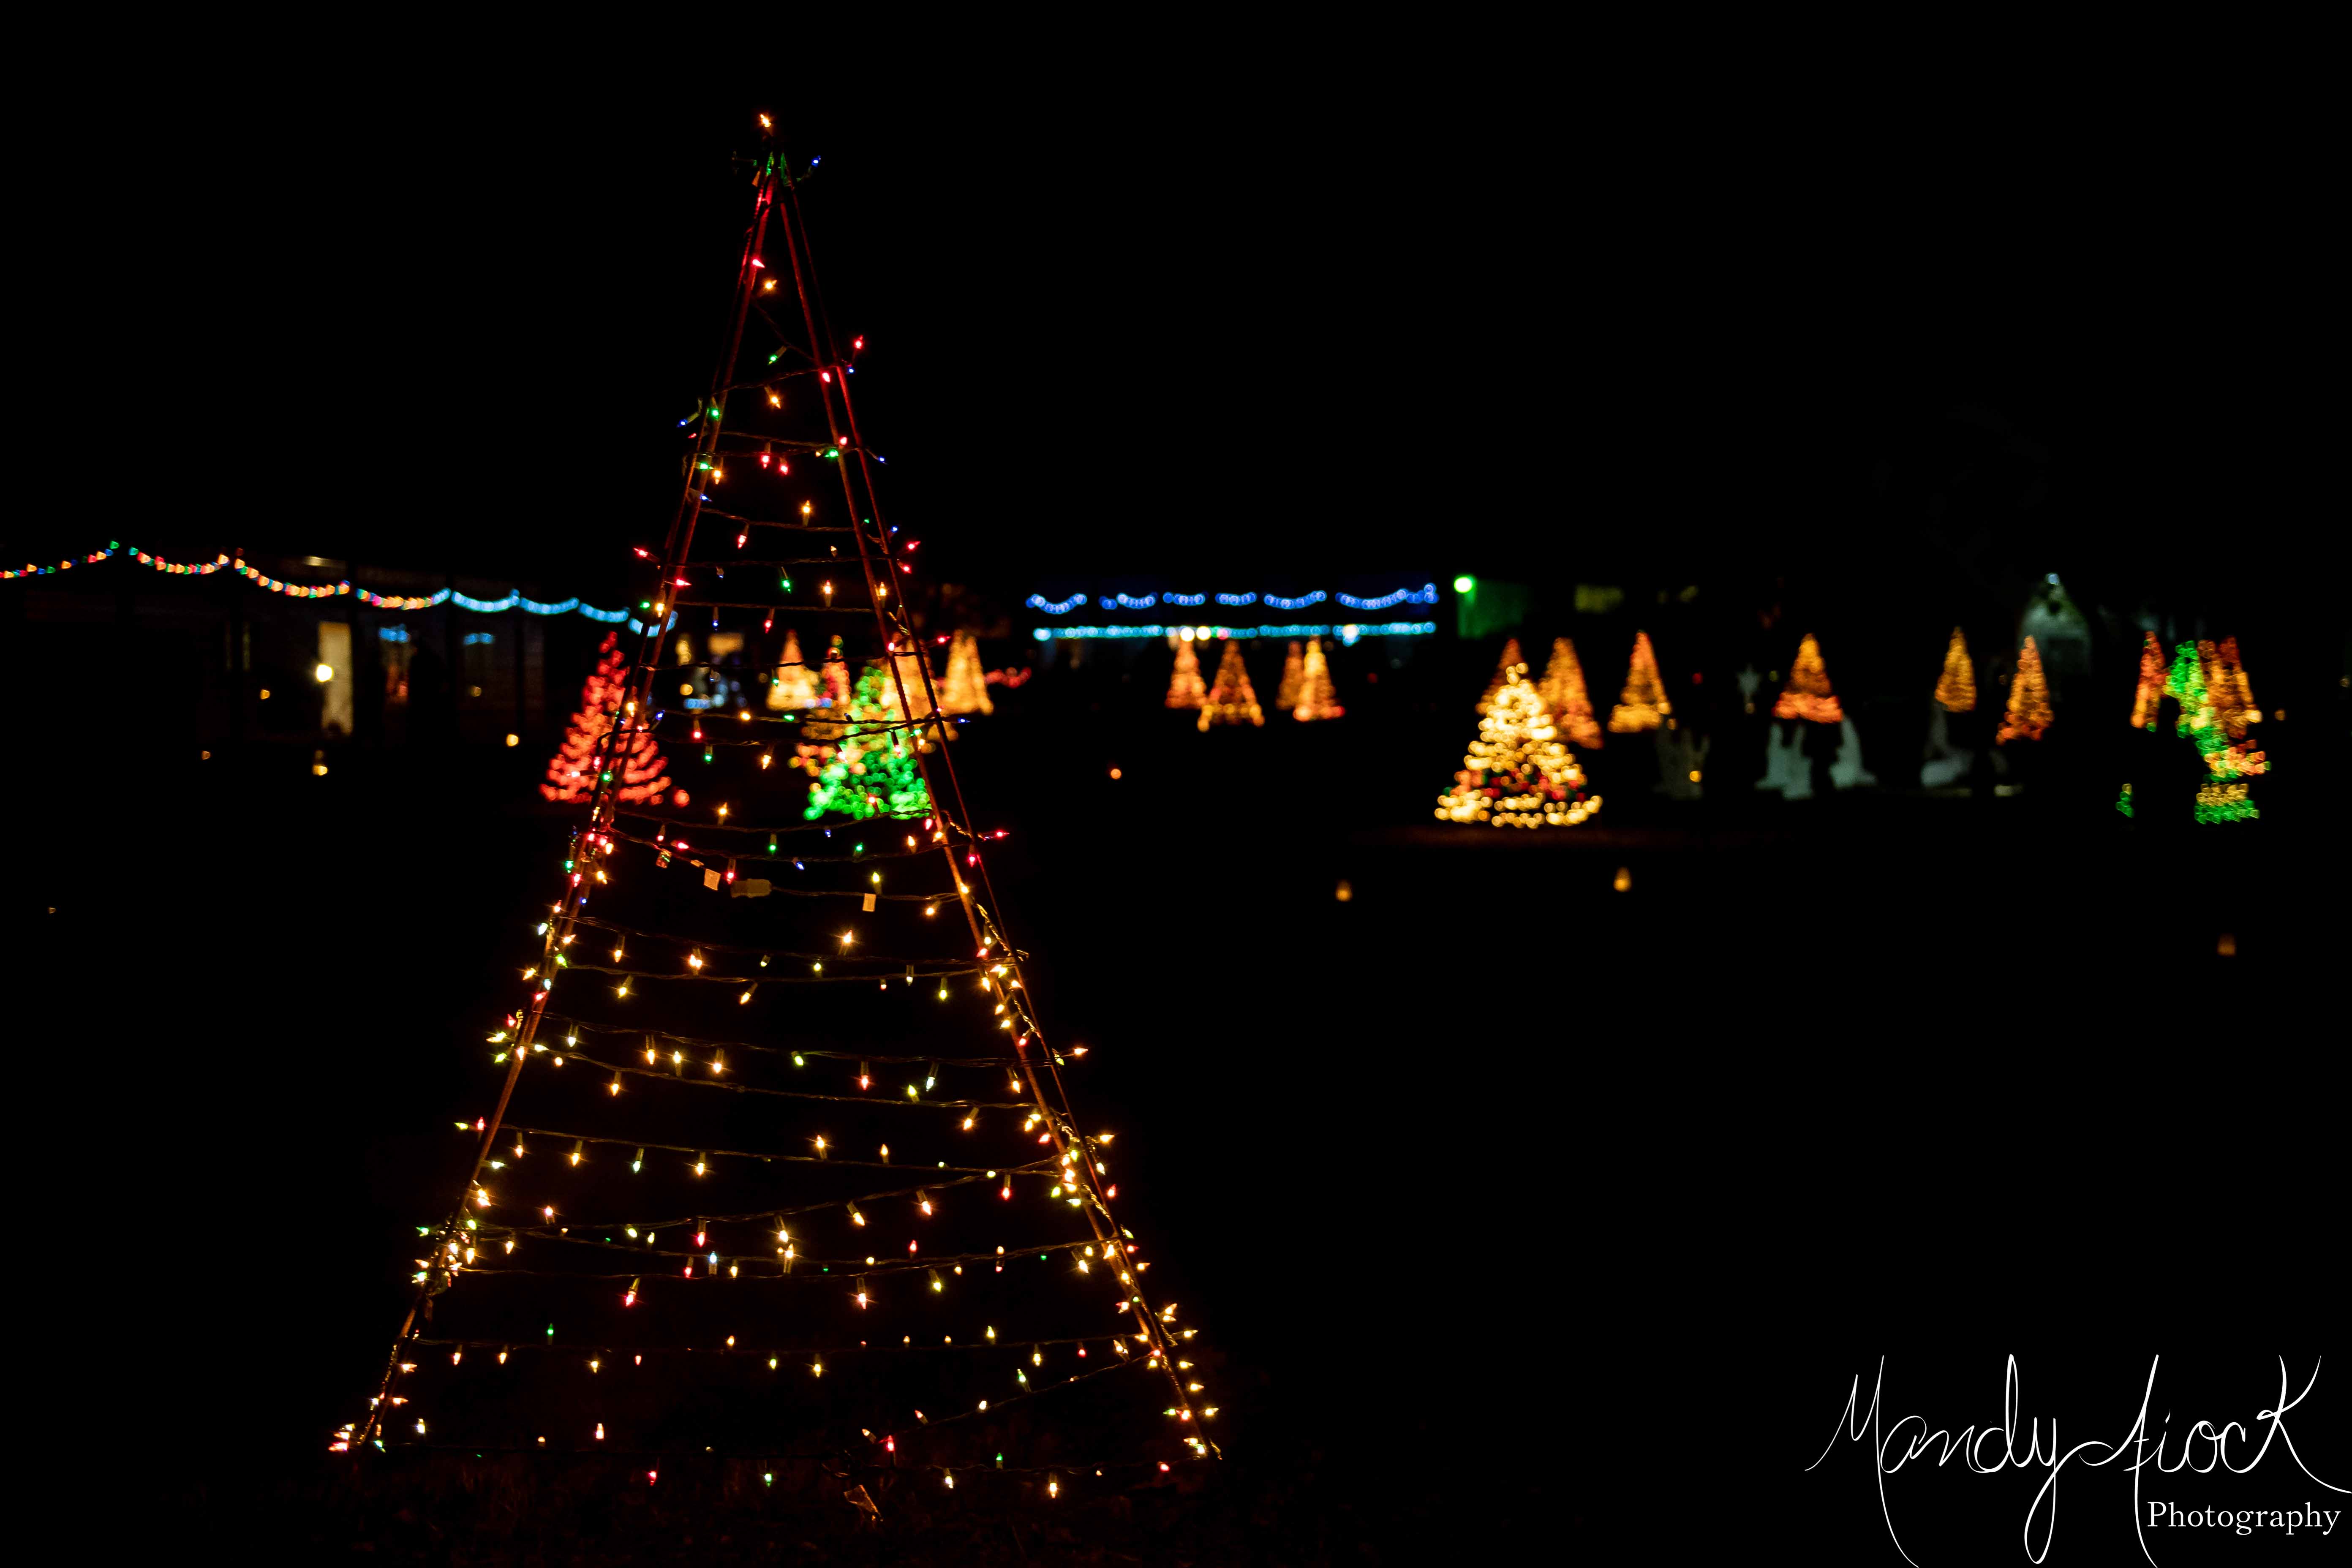 Photos from Christmas in the Park at Heritage Park by Mandy Fiock Photography